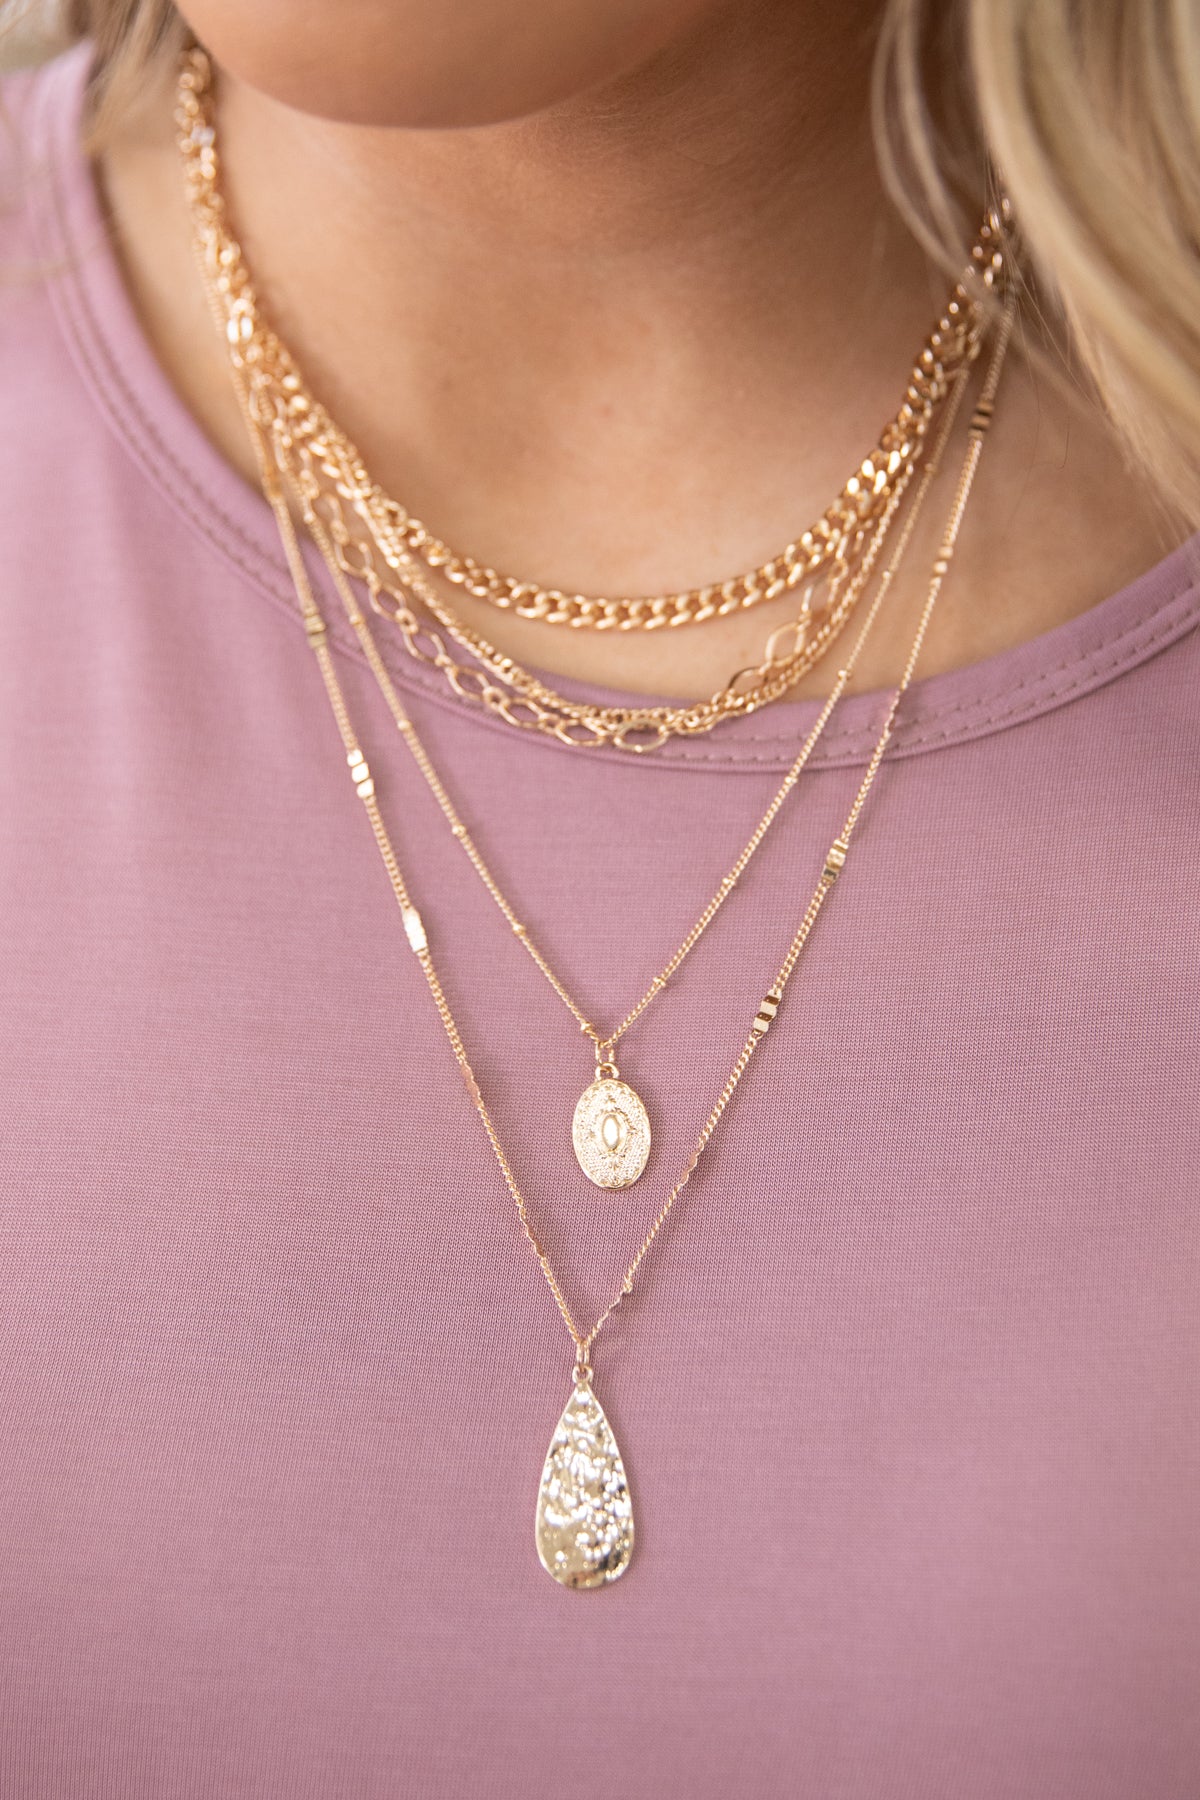 Gold Double Chain and Pendant Necklace - Filly Flair